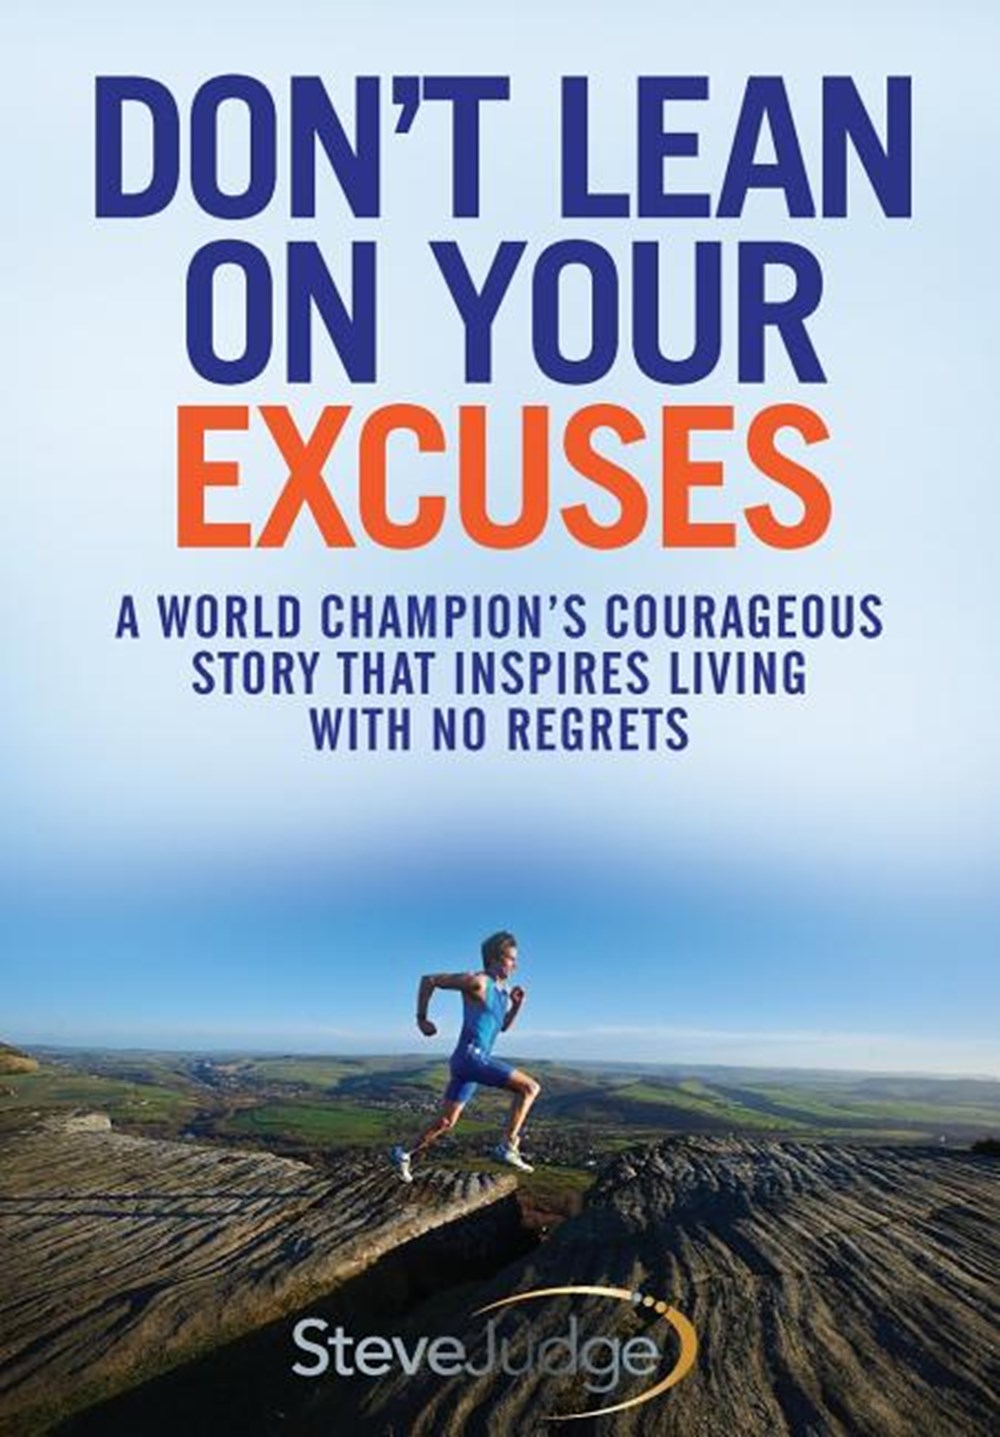 Don't Lean On Your Excuses: A World Champion's Courageous Story That Inspires Living With No Regrets